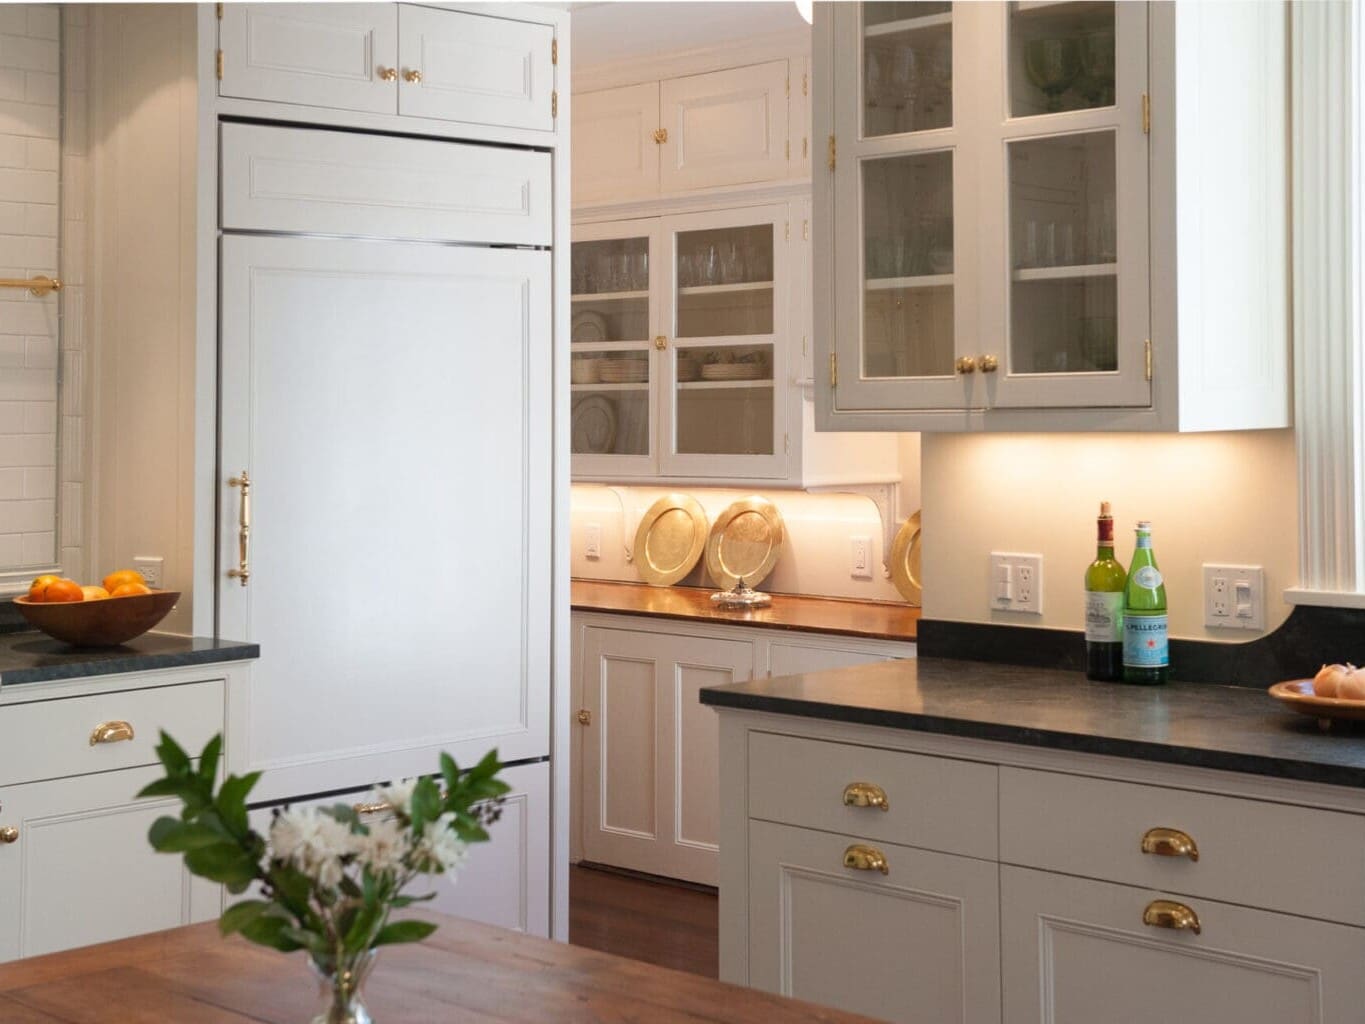 A photo of a kitchen with painted shaker-style cabinetry, brass hardware, a built-in fridge with shaker-style paneling, and black marble countertops.